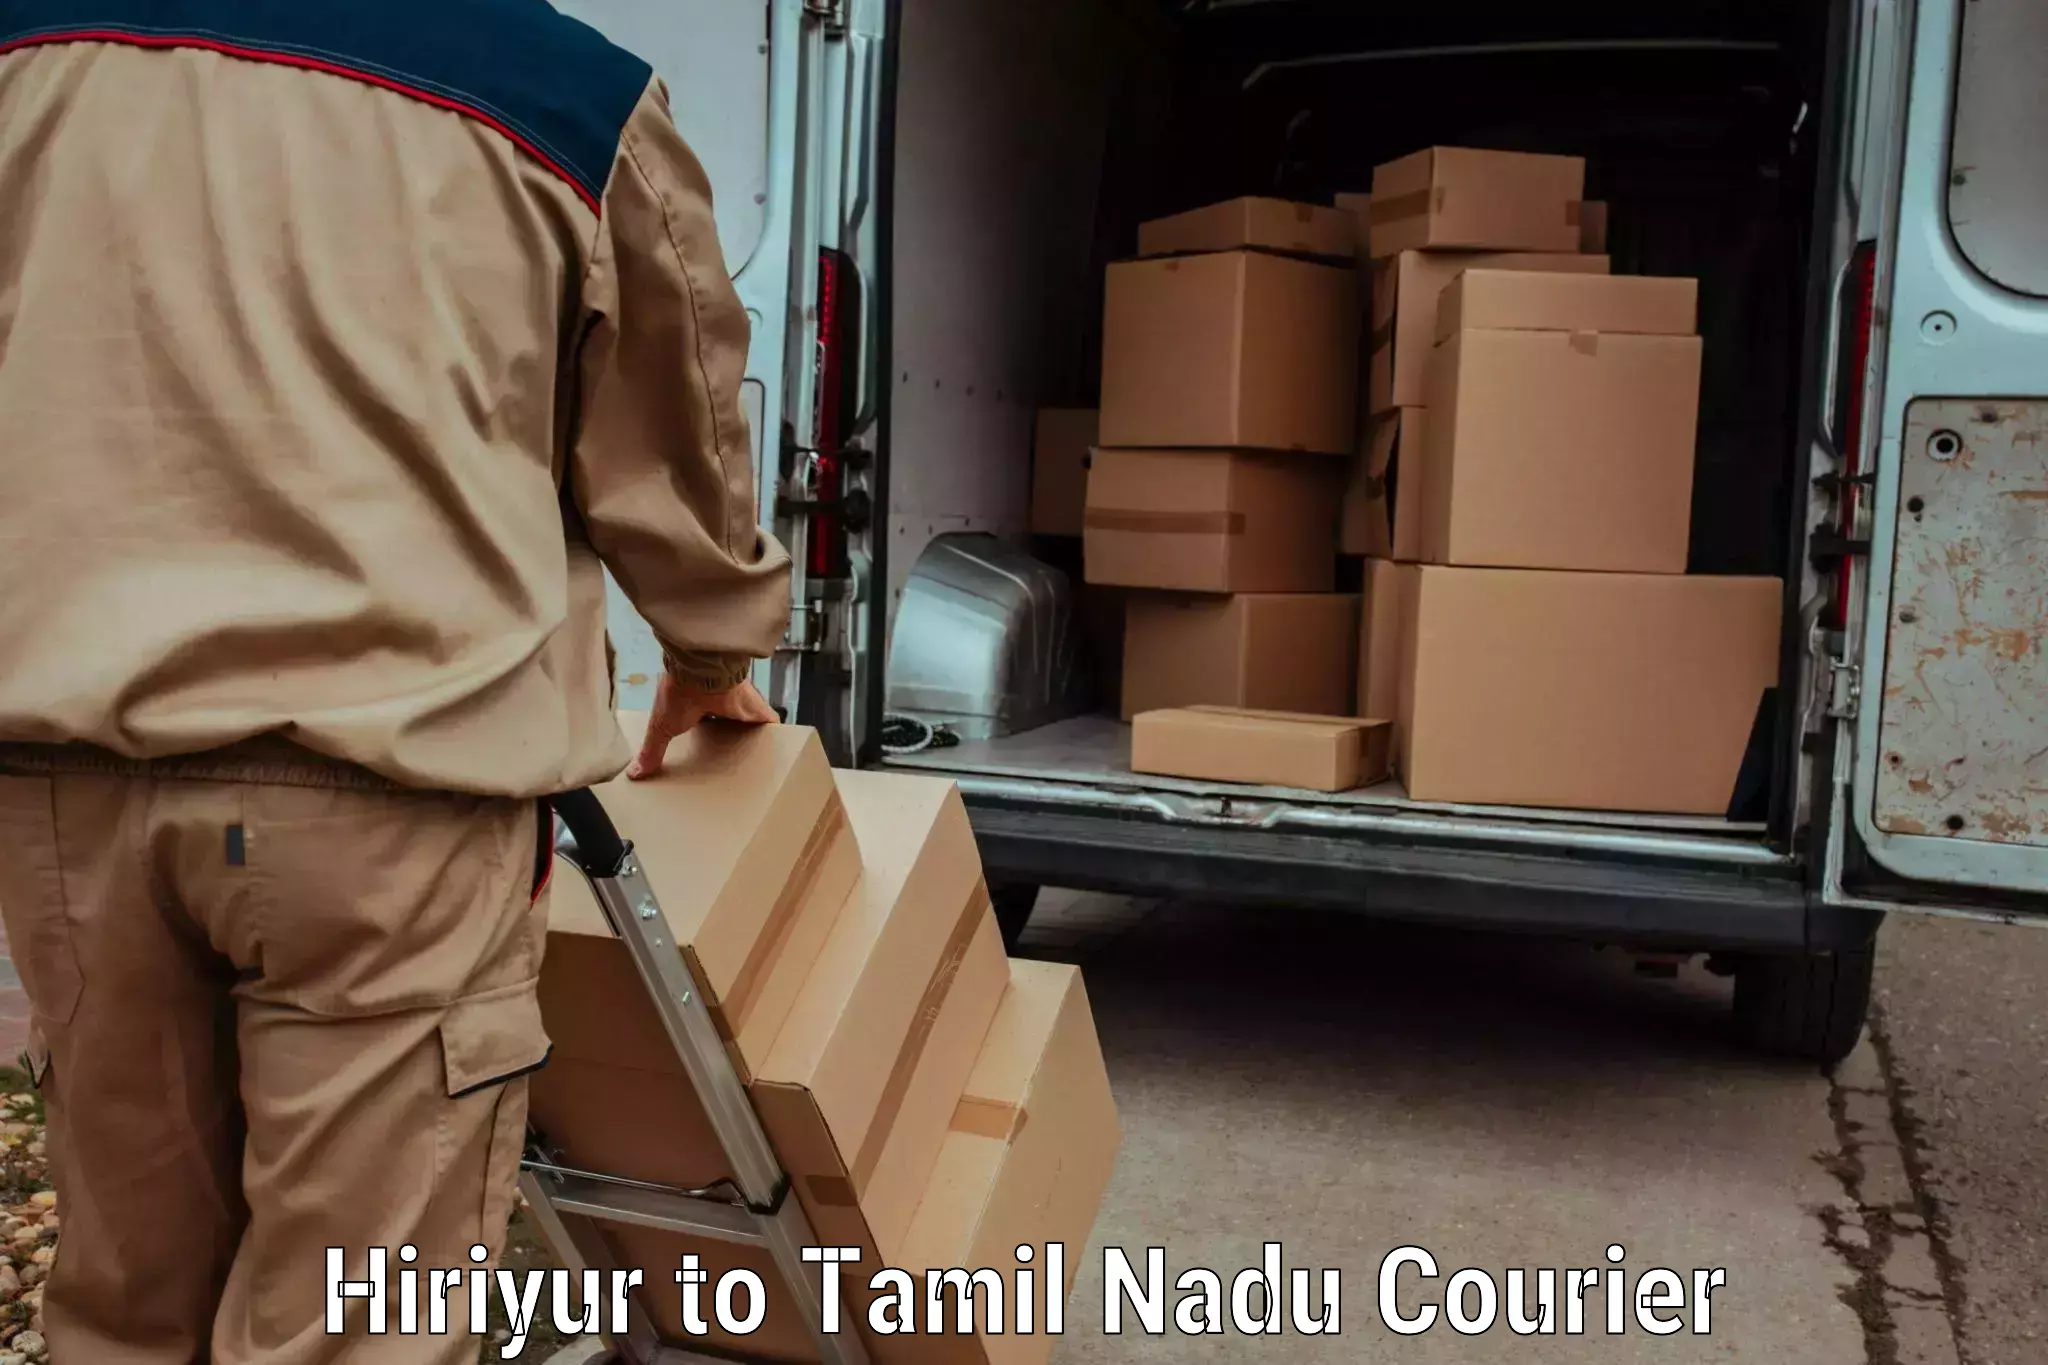 Overnight delivery services Hiriyur to Kulittalai